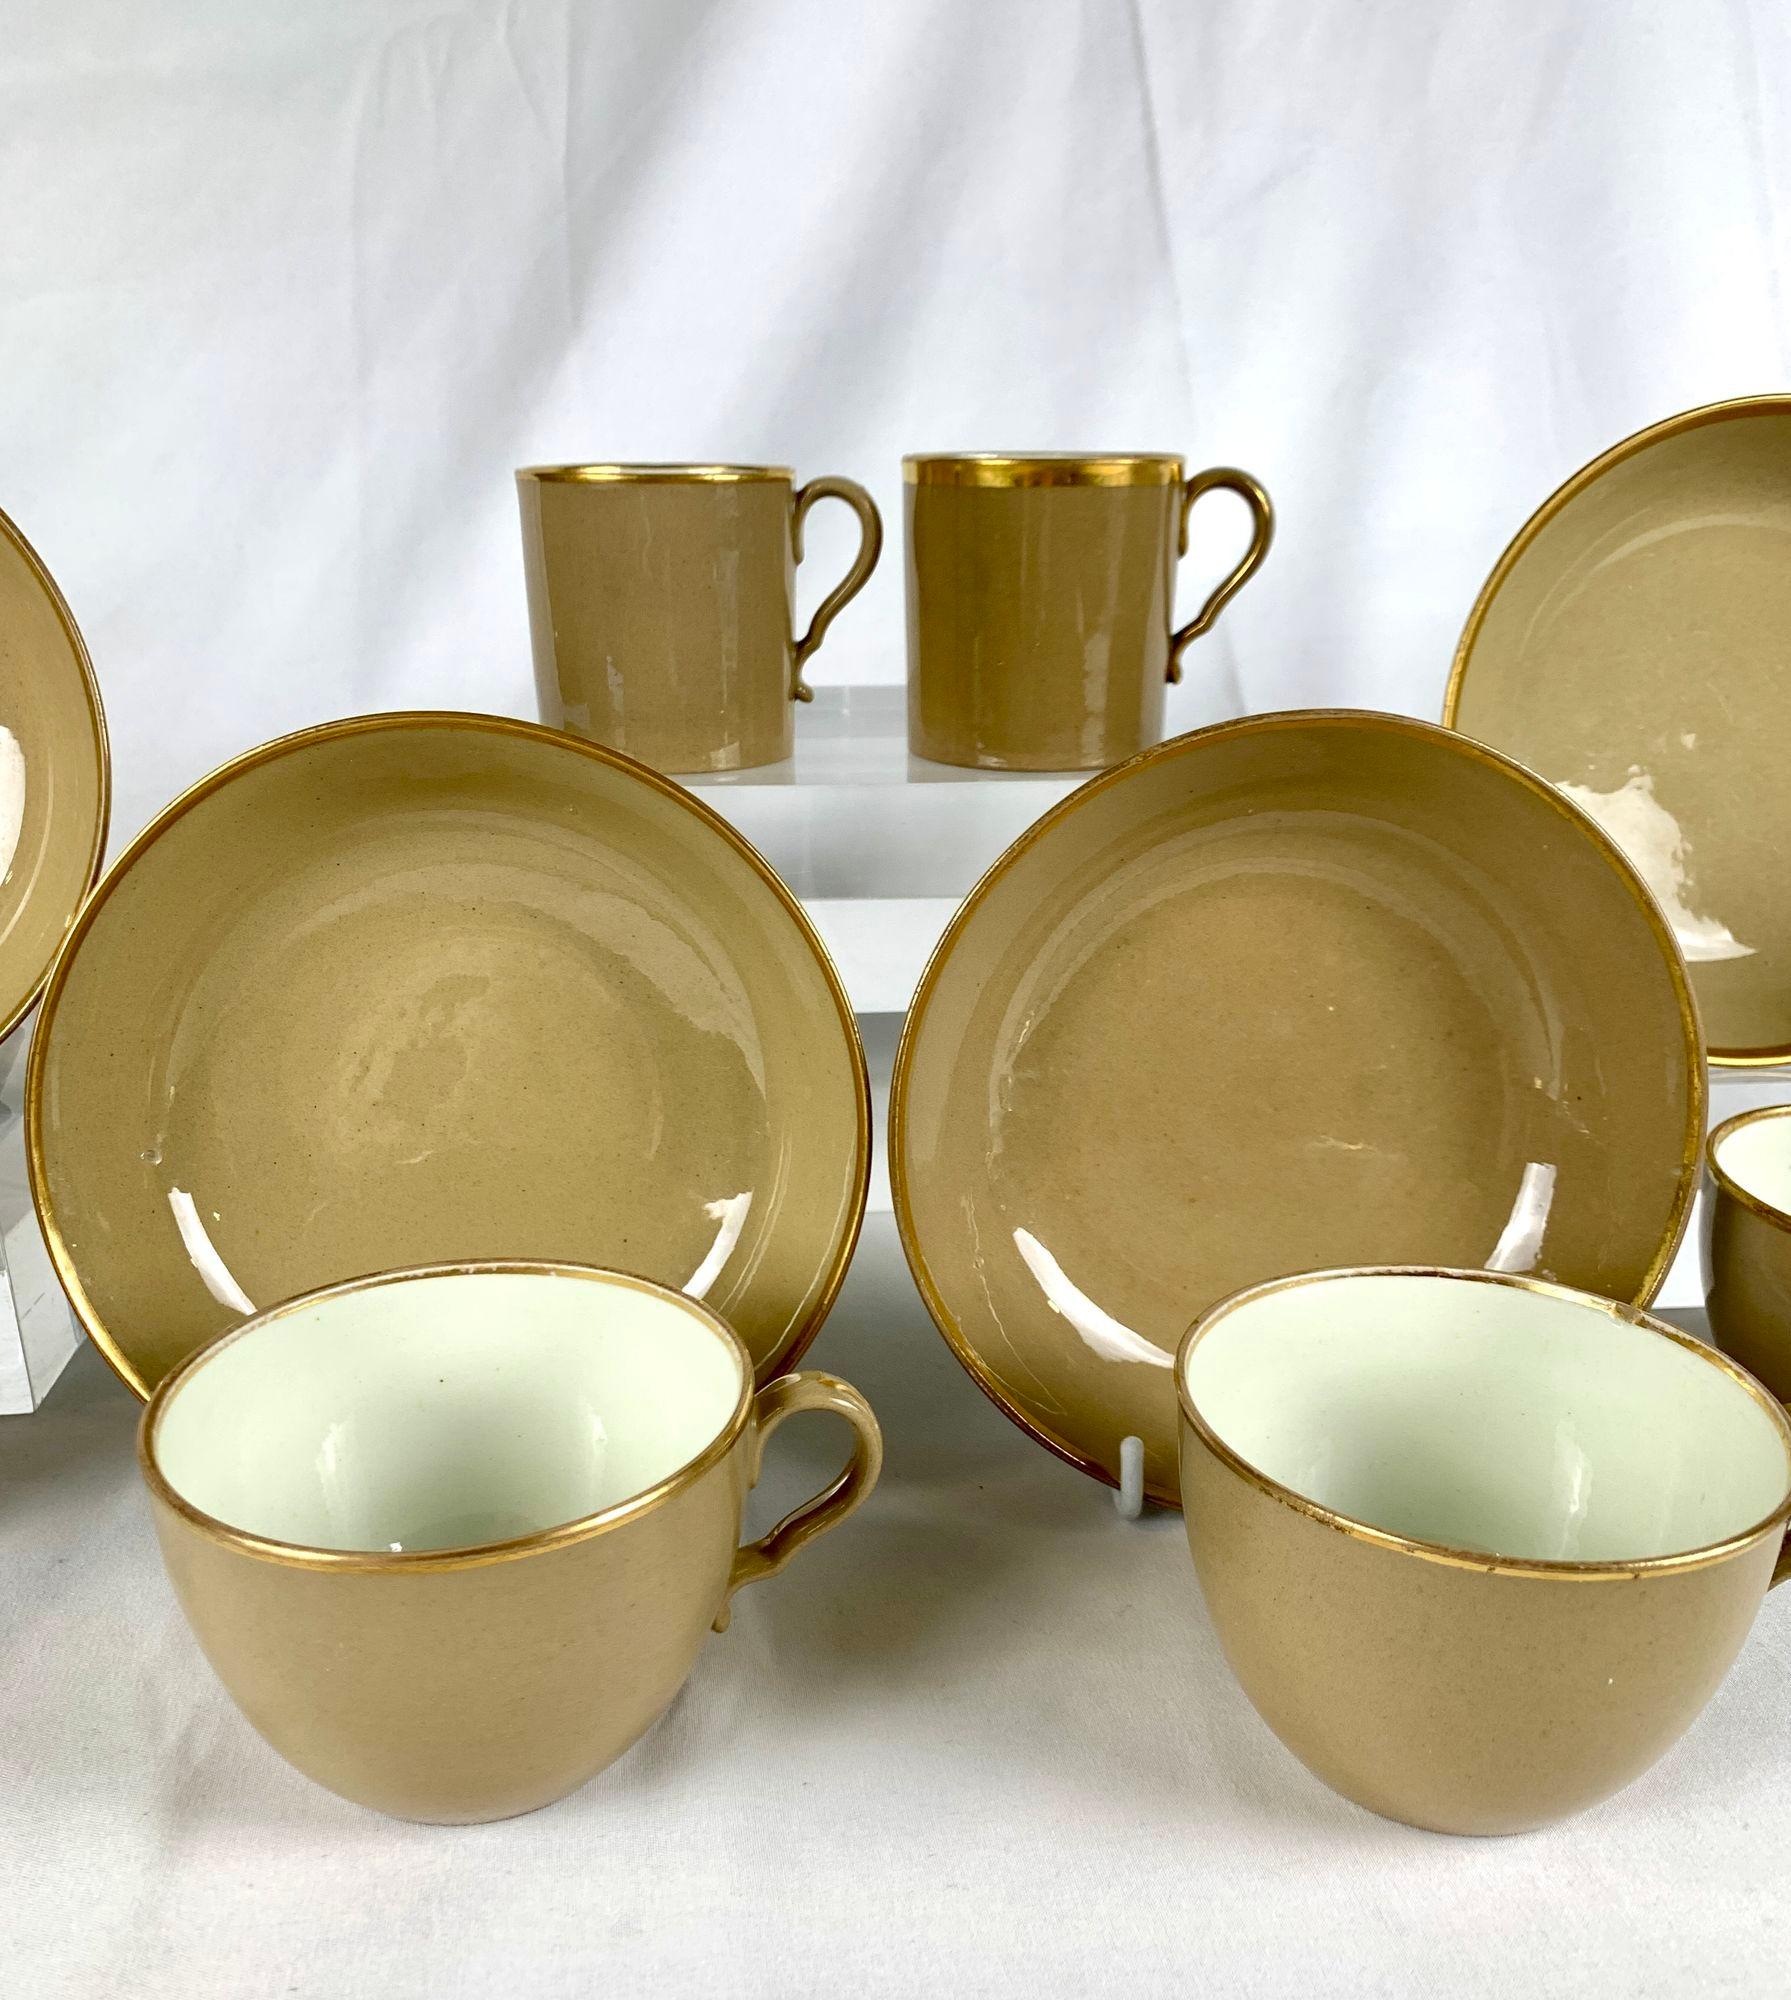 Glazed Antique Drabware Group of Cups and Saucers England Circa 1825